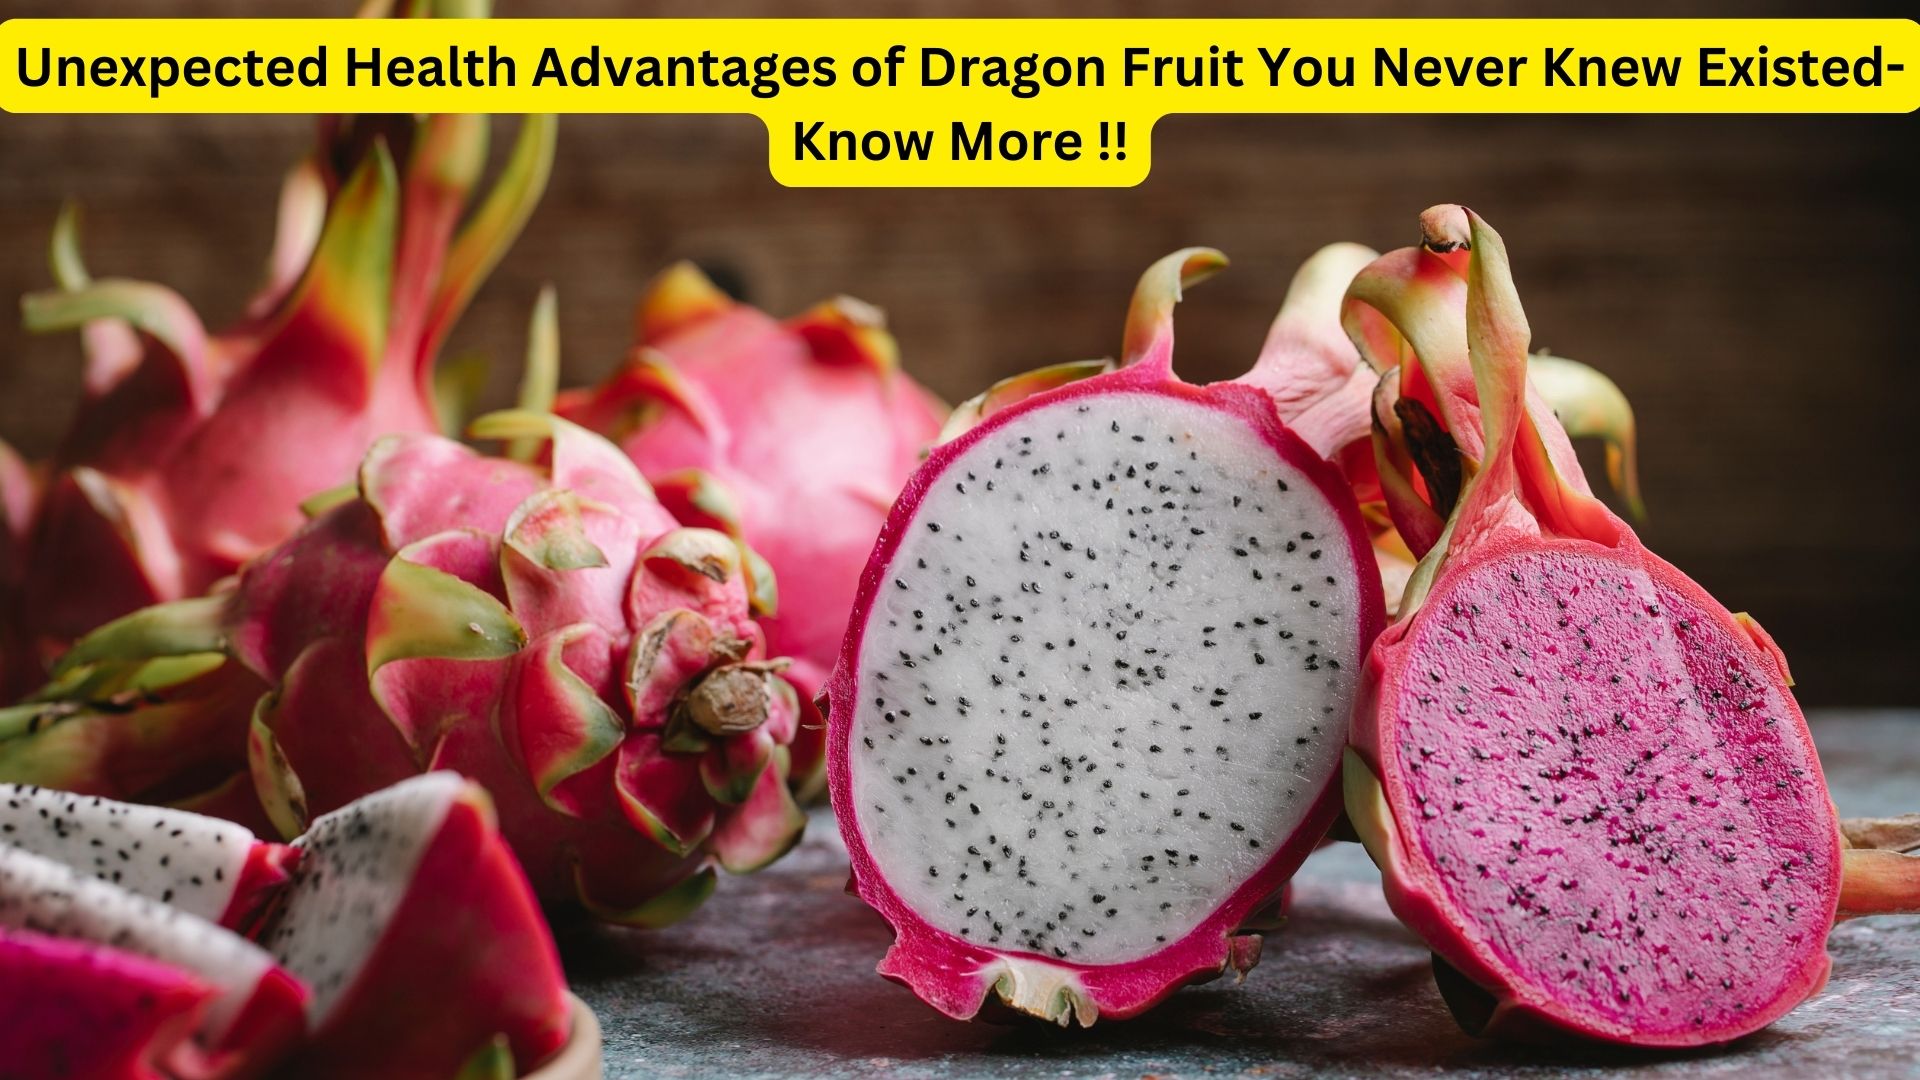 Unexpected Health Advantages of Dragon Fruit You Never Knew Existed- Know More !!